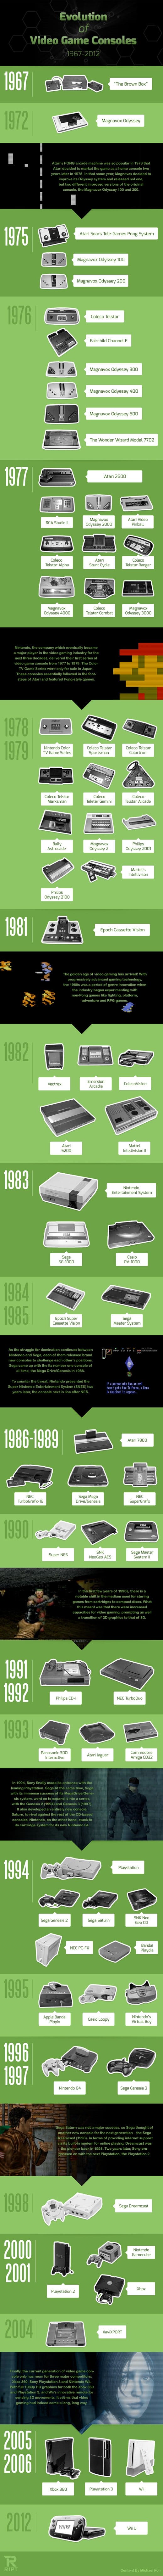 Vamers - FYI - Gadgetology - Evolution of Video Game Consoles